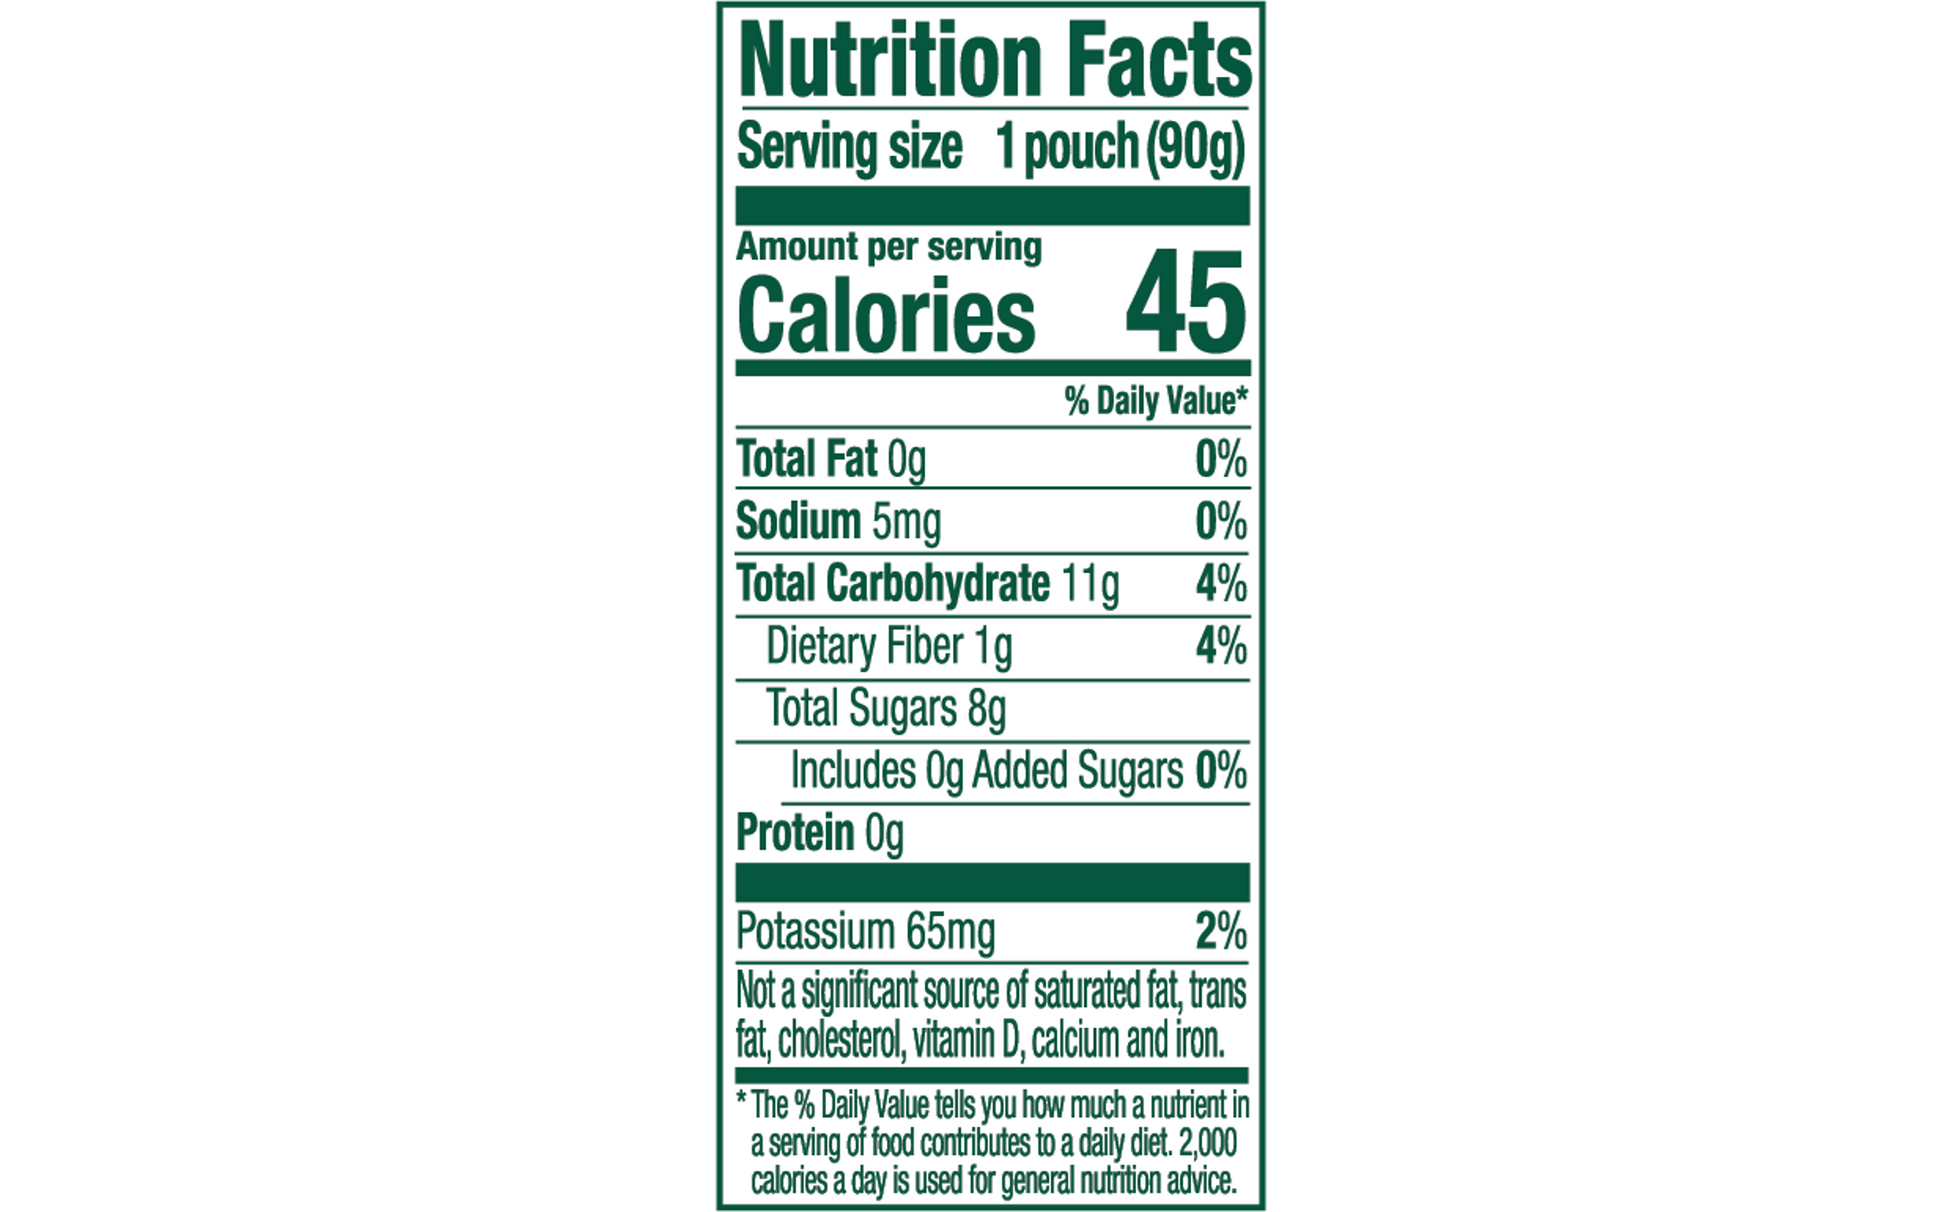 Nutrition facts for Buddy Fruits Blueberry & Apple fruit pouch.